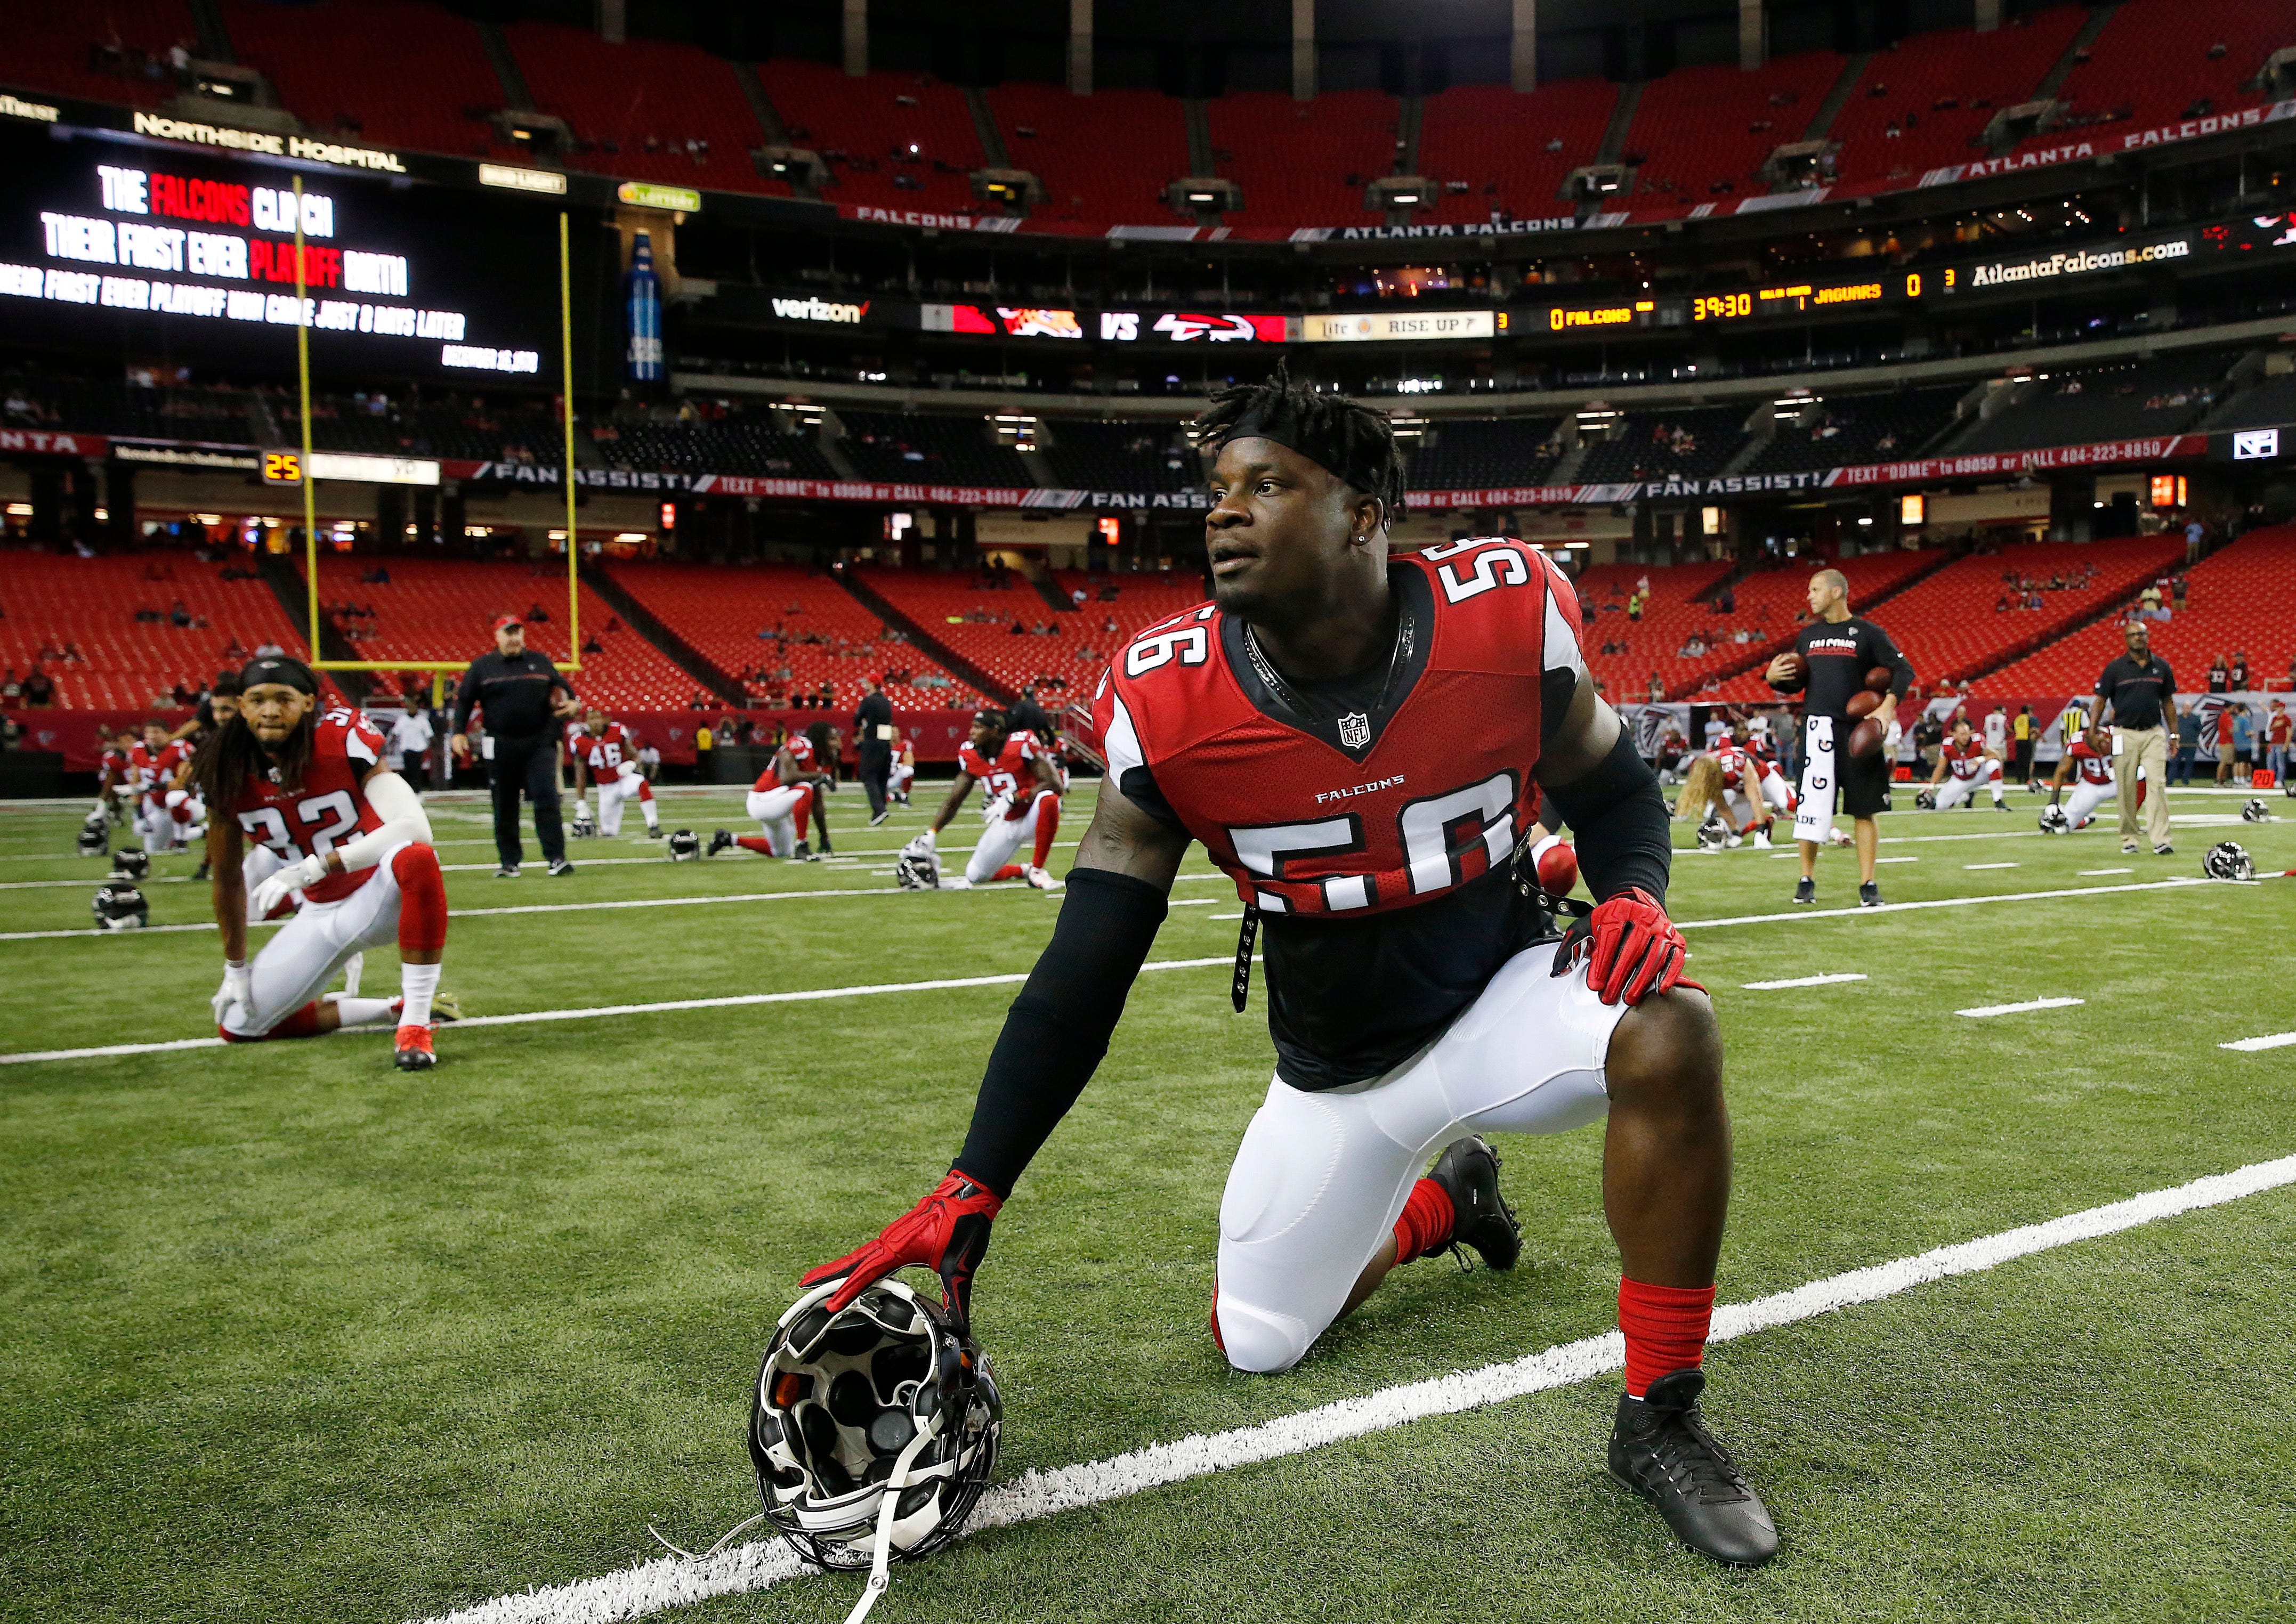 Familiar face Weatherspoon back for 3rd stint with Falcons